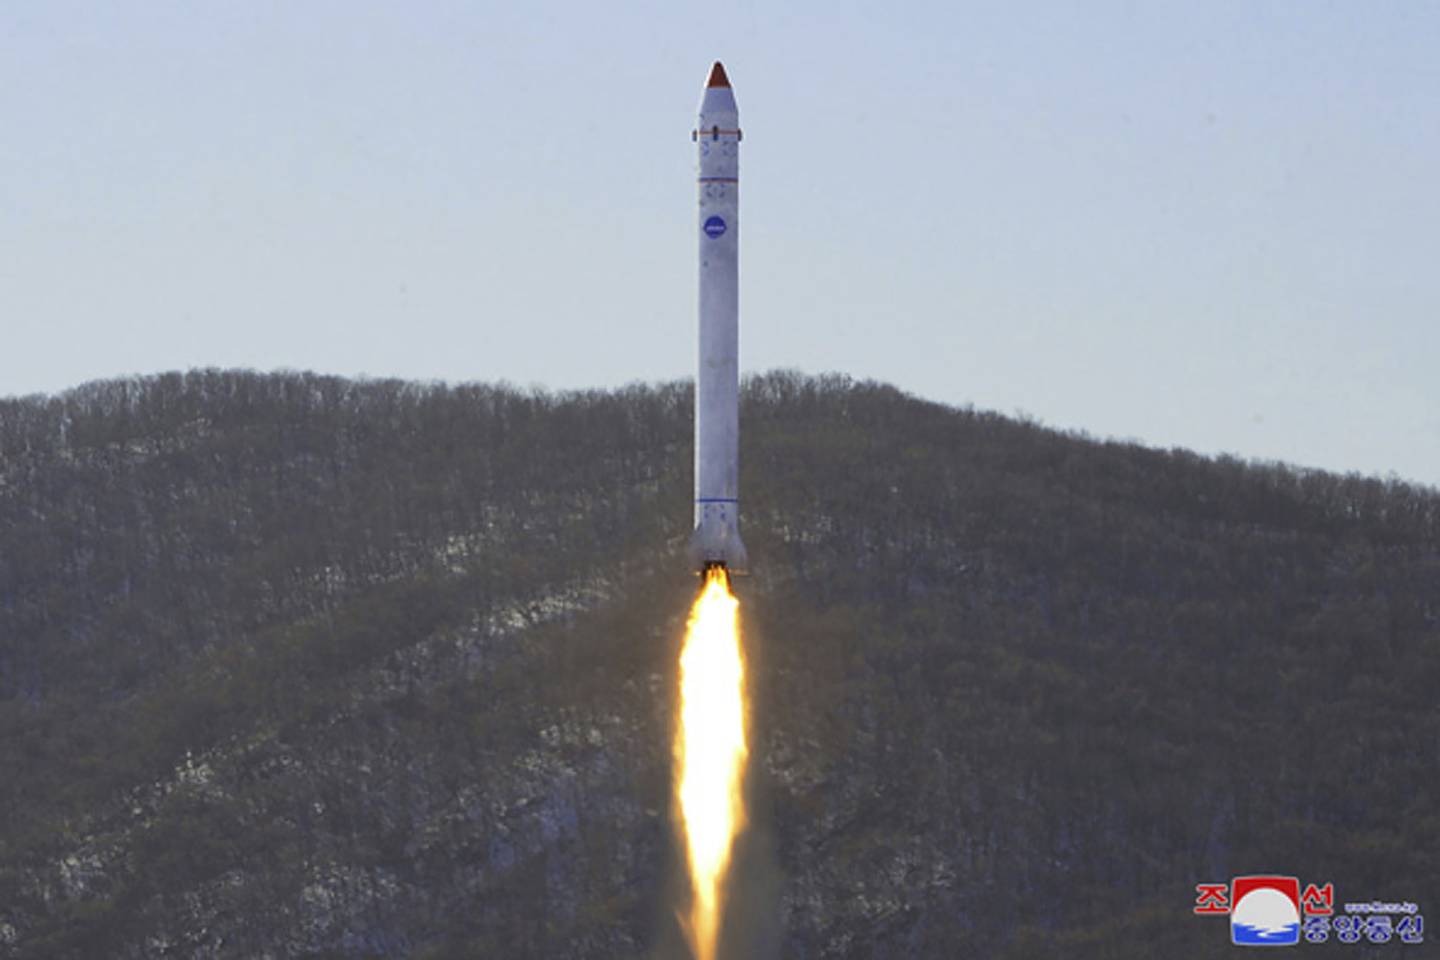 This photo provided by the North Korean government shows what it says is a test of a rocket with the test satellite at the Sohae Satellite Launching Ground in North Korea on Dec. 18, 2022.